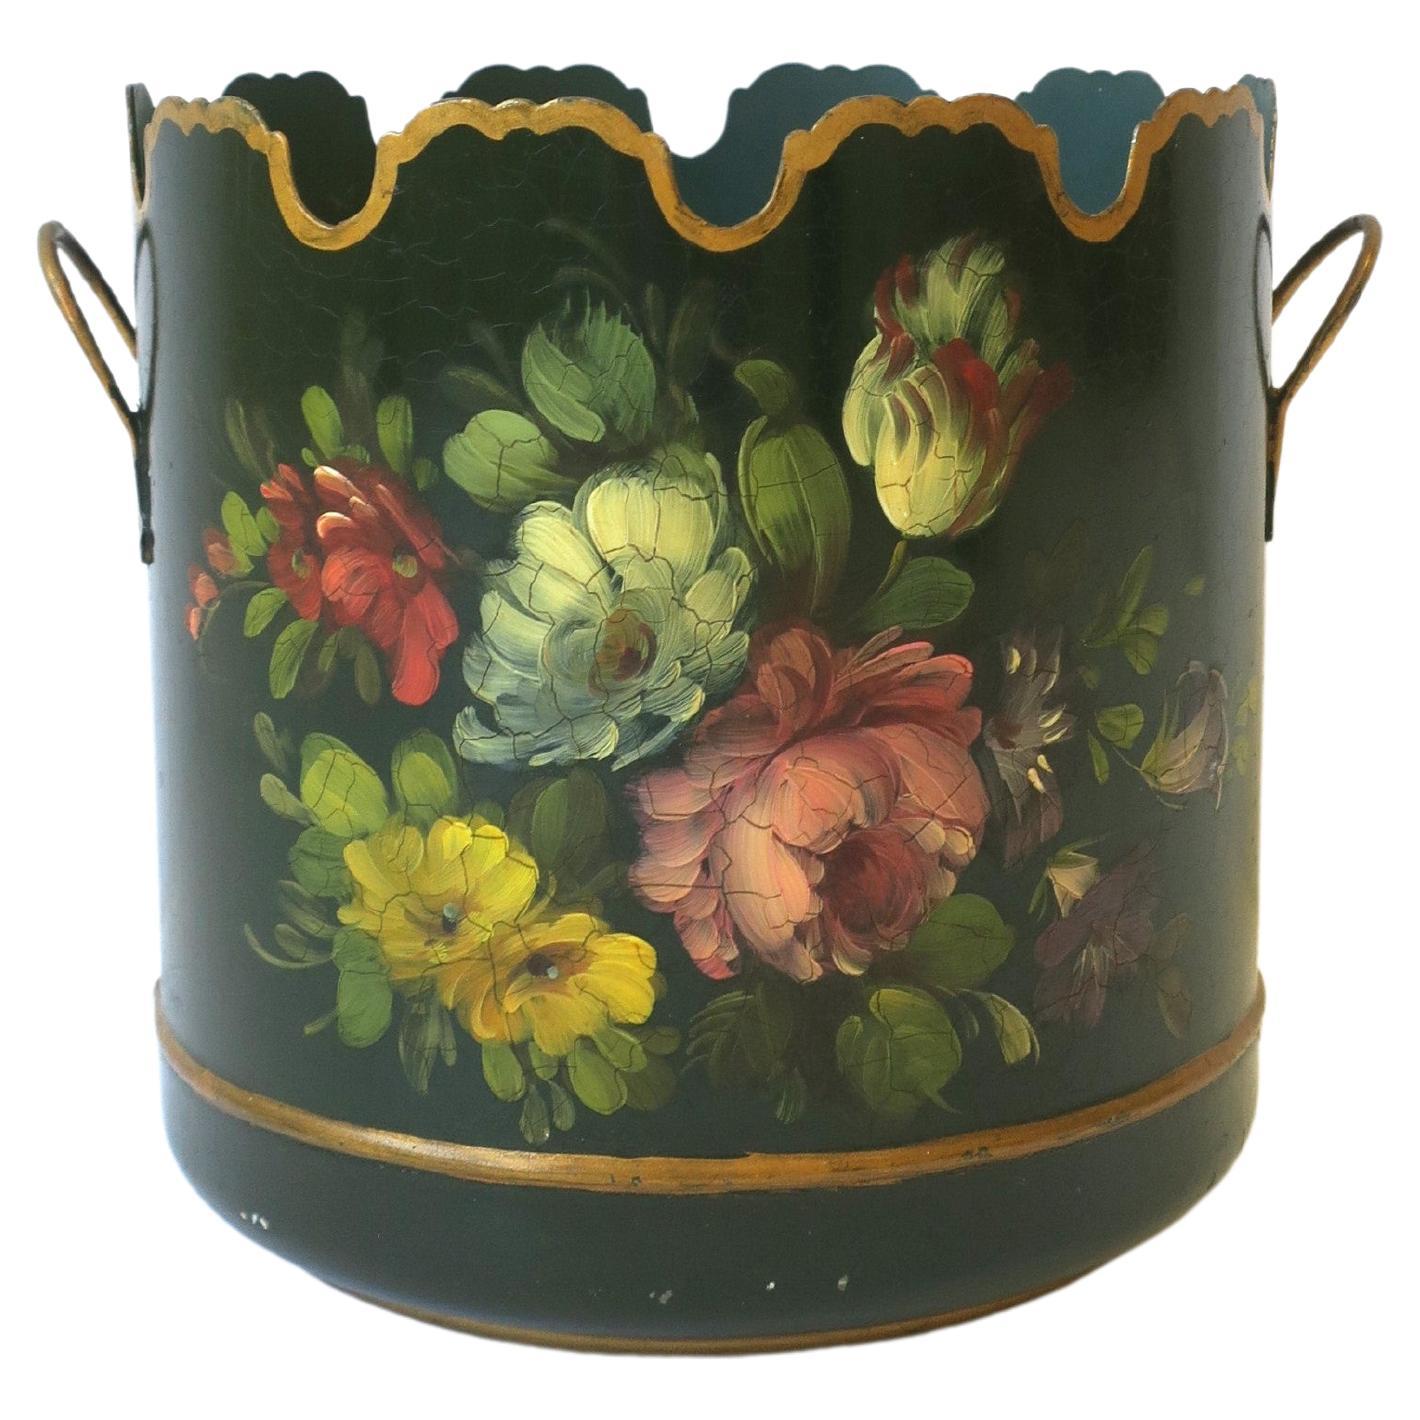 French Tôle Green & Gold Jardinière Cachepot with Scalloped Edge, 20th c France